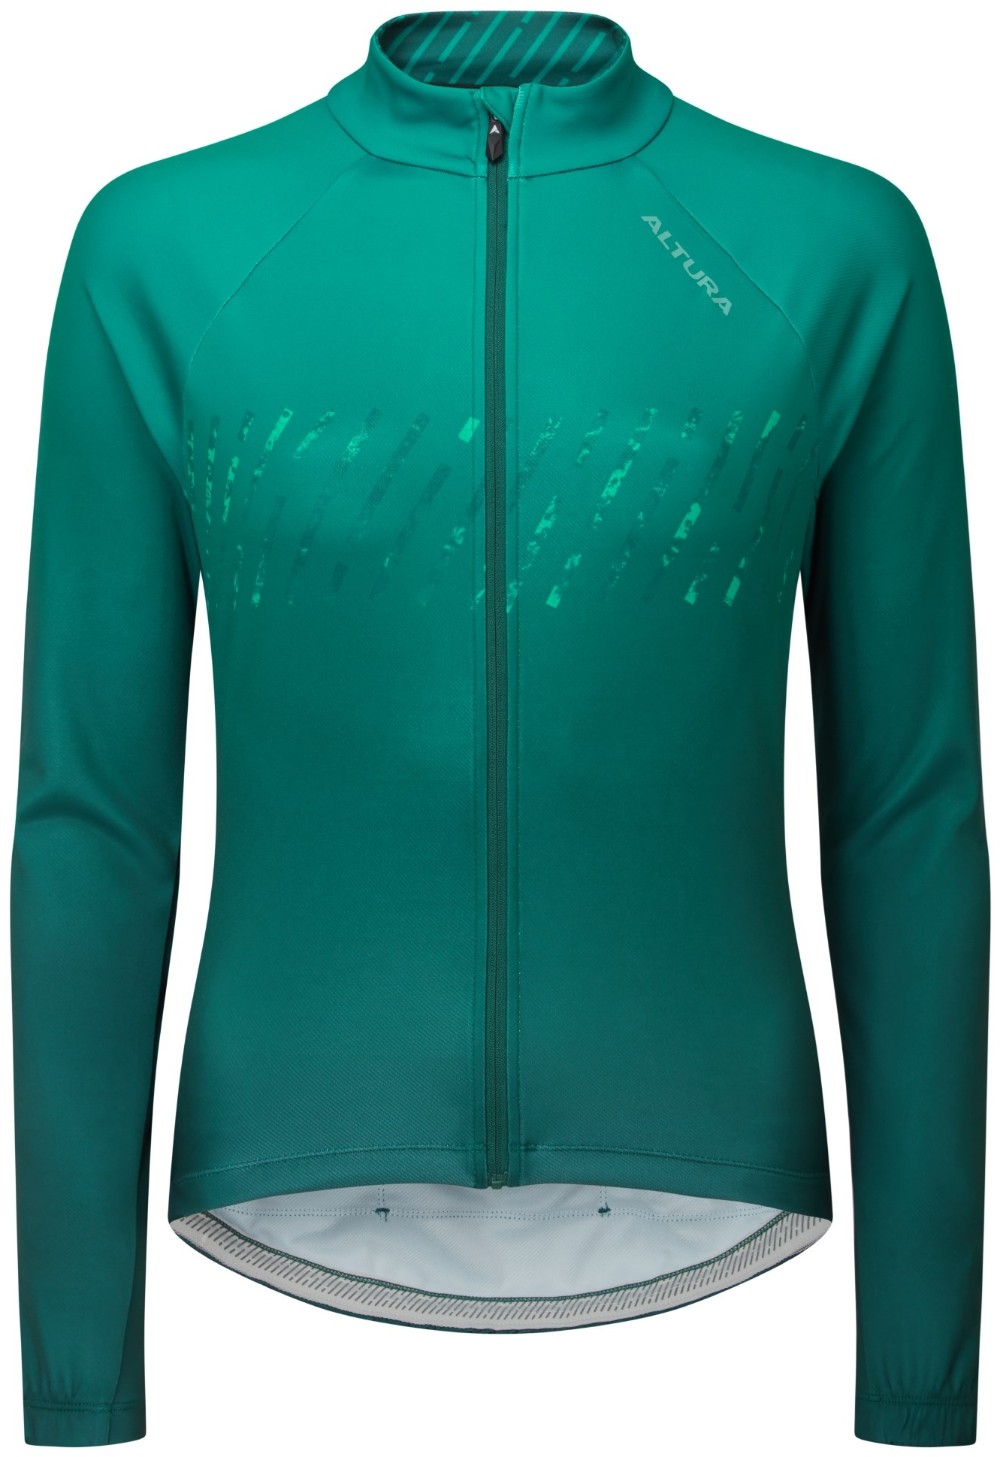 Airstream Womens Long Sleeve Jersey image 0